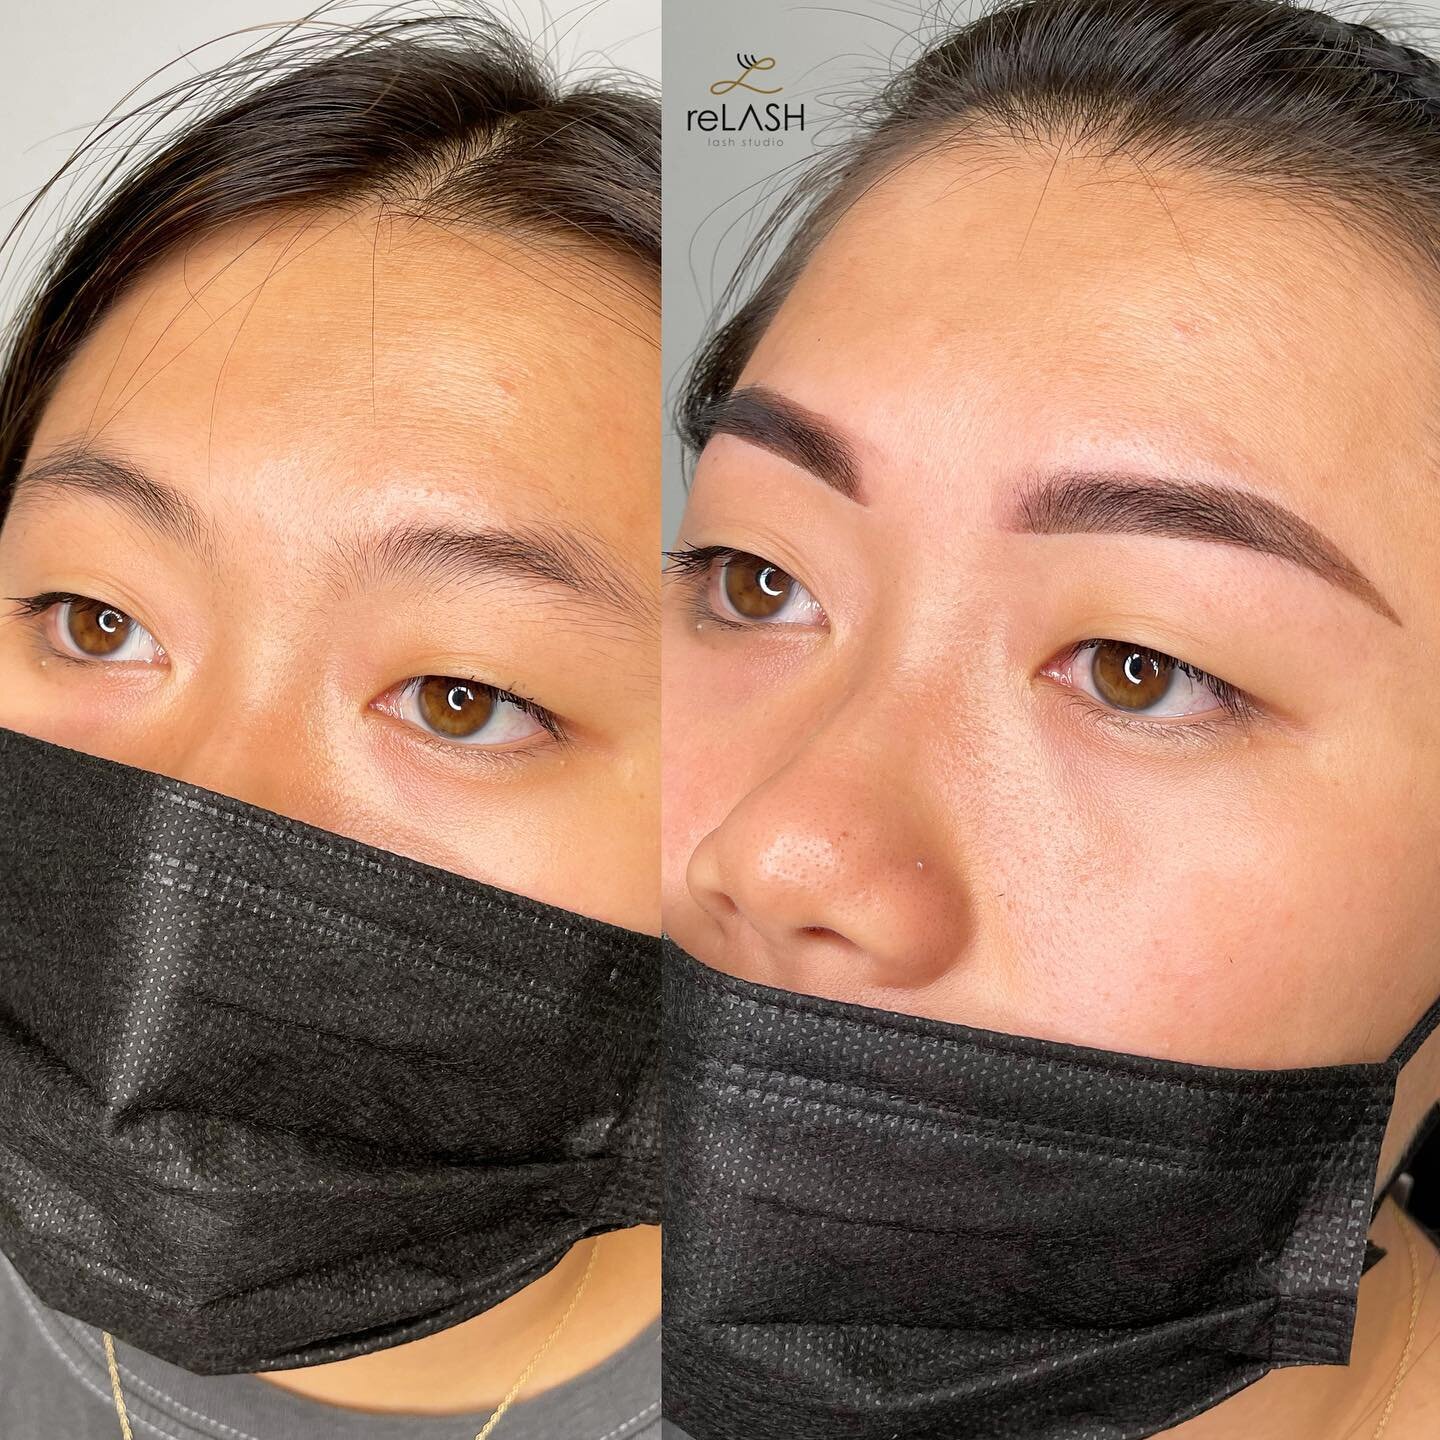 Brow Tint + Shaping

To create these beautiful brows I used @schwarzkopfpro Igora Brow Tint and @gigispa wax.

Have you been wanting to try this service and have questions? Feel free to ask in the comments 🙂

Are you looking to provide Henna or Tint